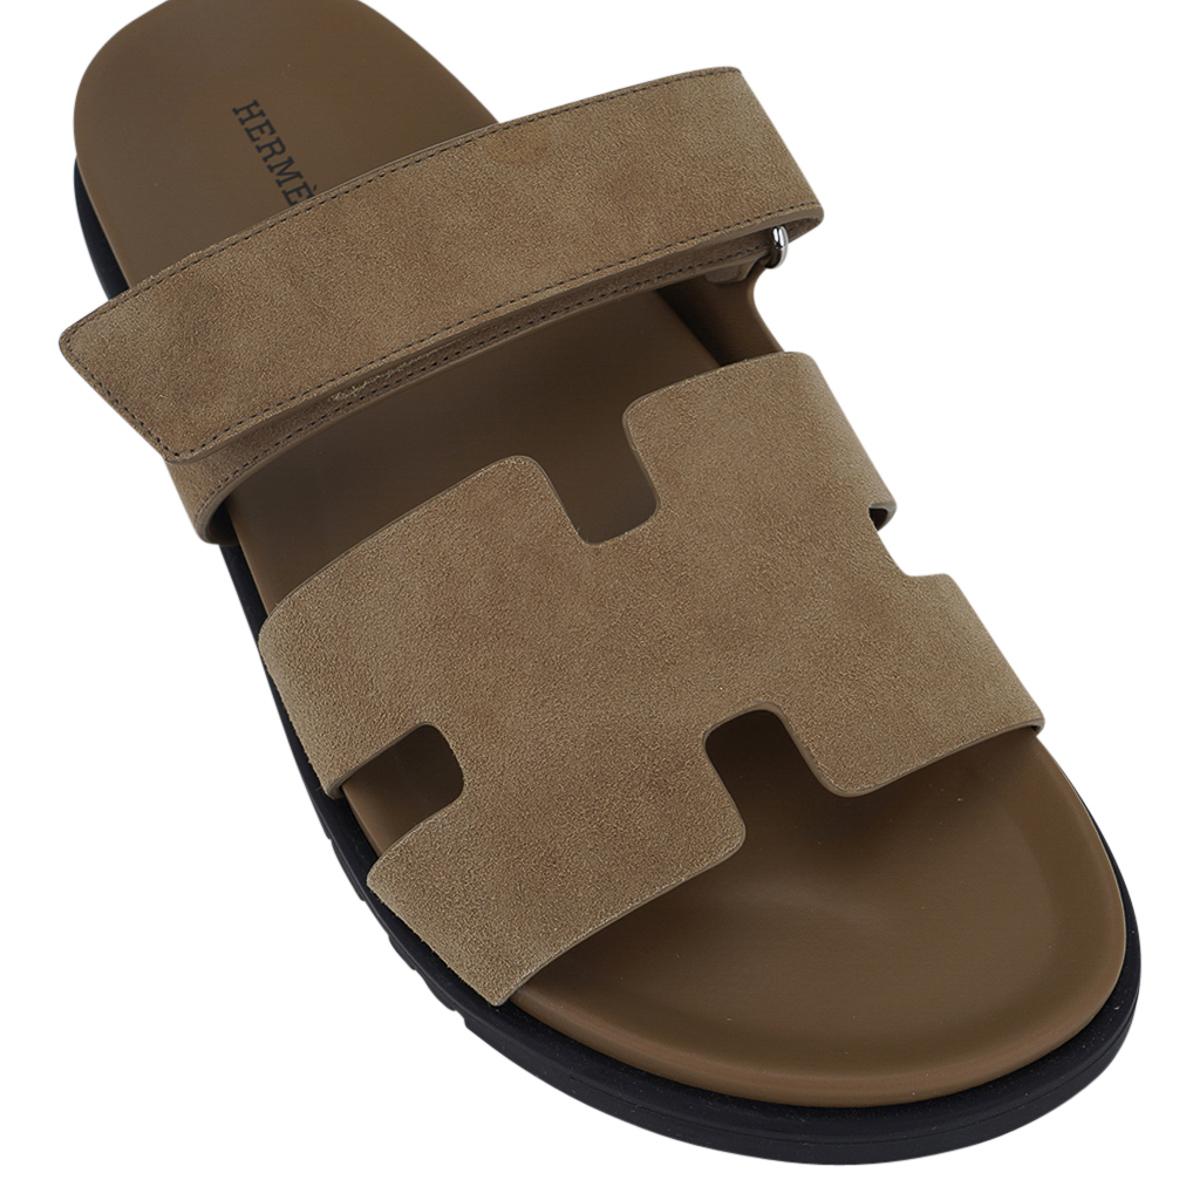 Hermes Men's Chypre Doblis (Suede) Tan Sandal 43 / 10 In New Condition For Sale In Miami, FL